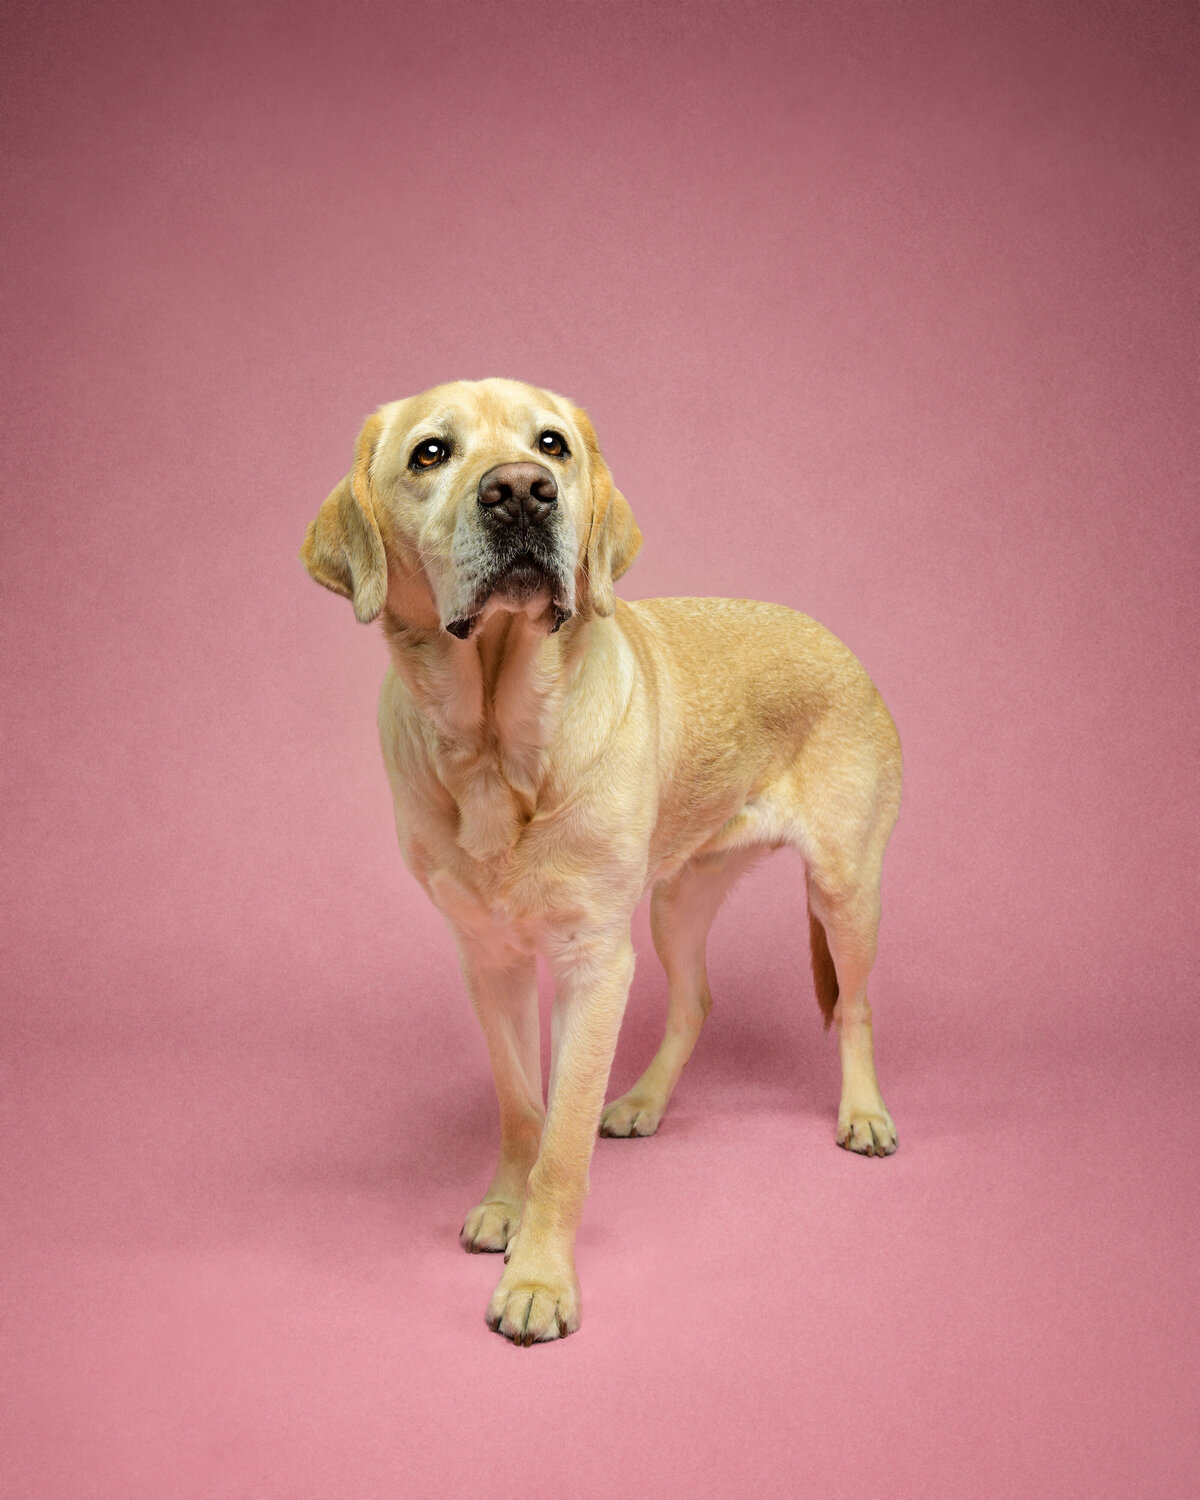 Capture the elegance of studio dog portrait photography in Vancouver with Pets through the Lens Photography. This beautiful image features a dignified Labrador standing against a soft pink backdrop, showcasing its gentle and expressive nature. Our professional pet photography studio specializes in creating high-quality, timeless portraits that highlight the unique beauty and personality of your pet. Choose Pets through the Lens Photography for the finest pet photography experience in Vancouver.